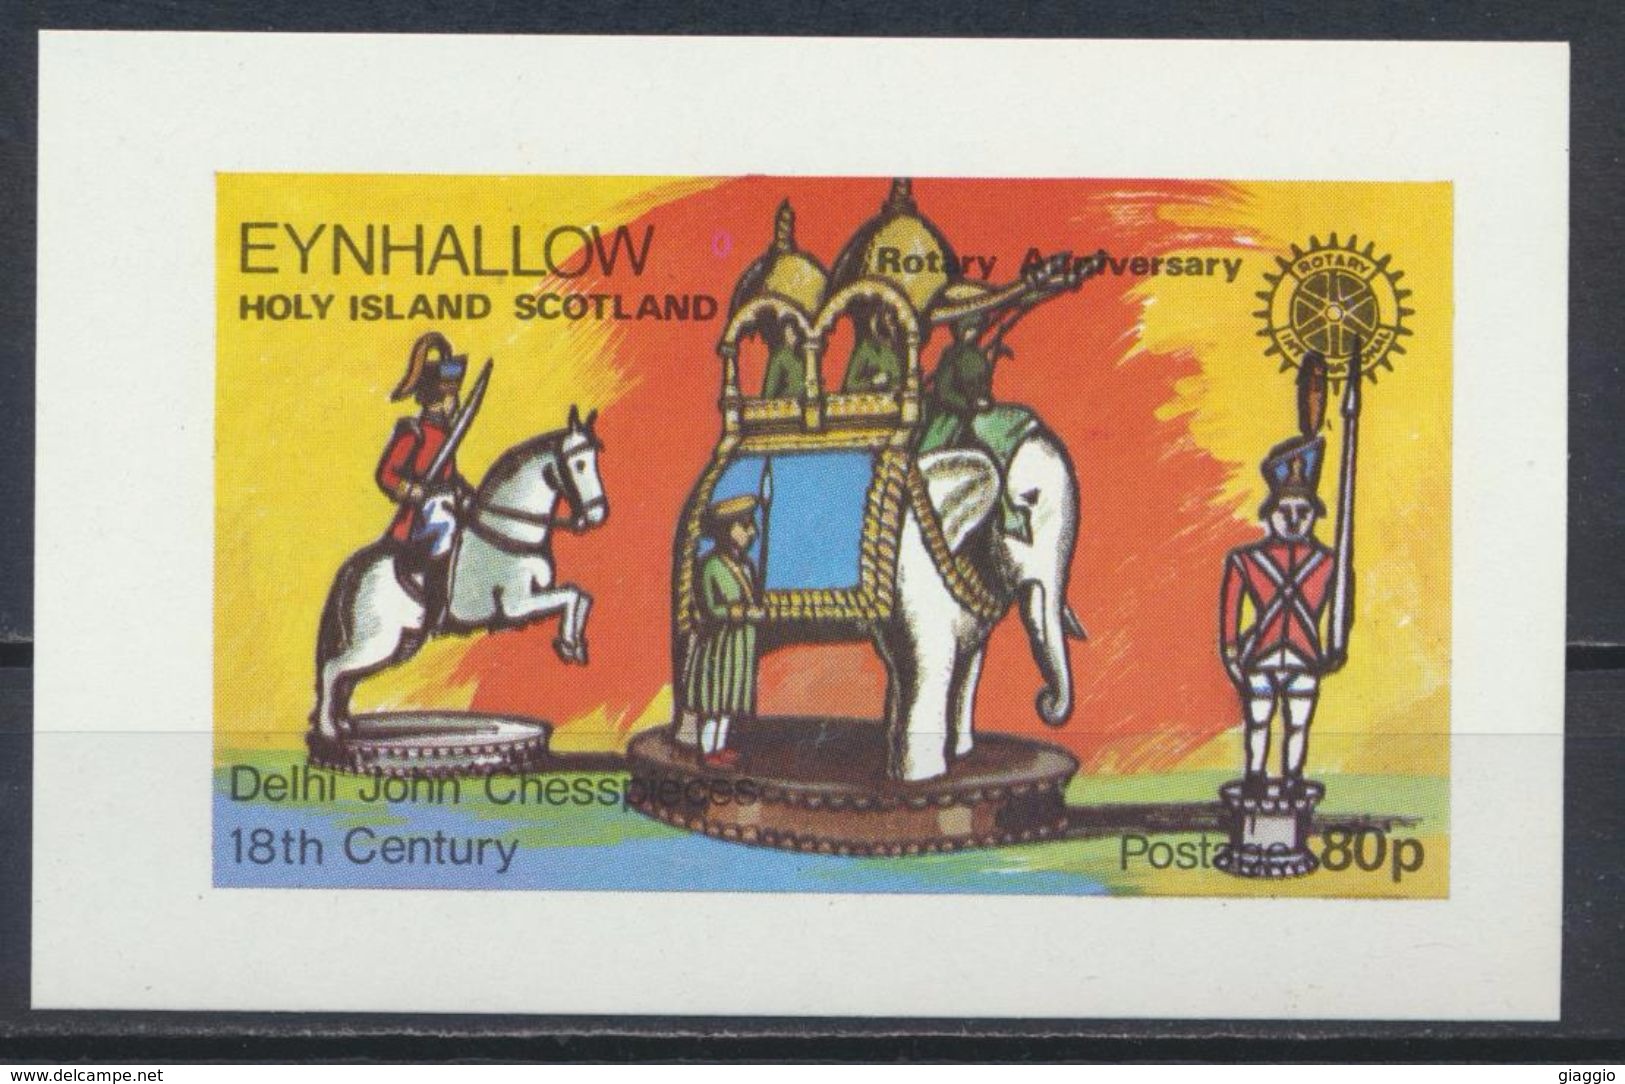 °°° EYNHALLOW ISLAND - ANNIVERSARY OF ROTARY - 1998 MNH °°° - Local Issues